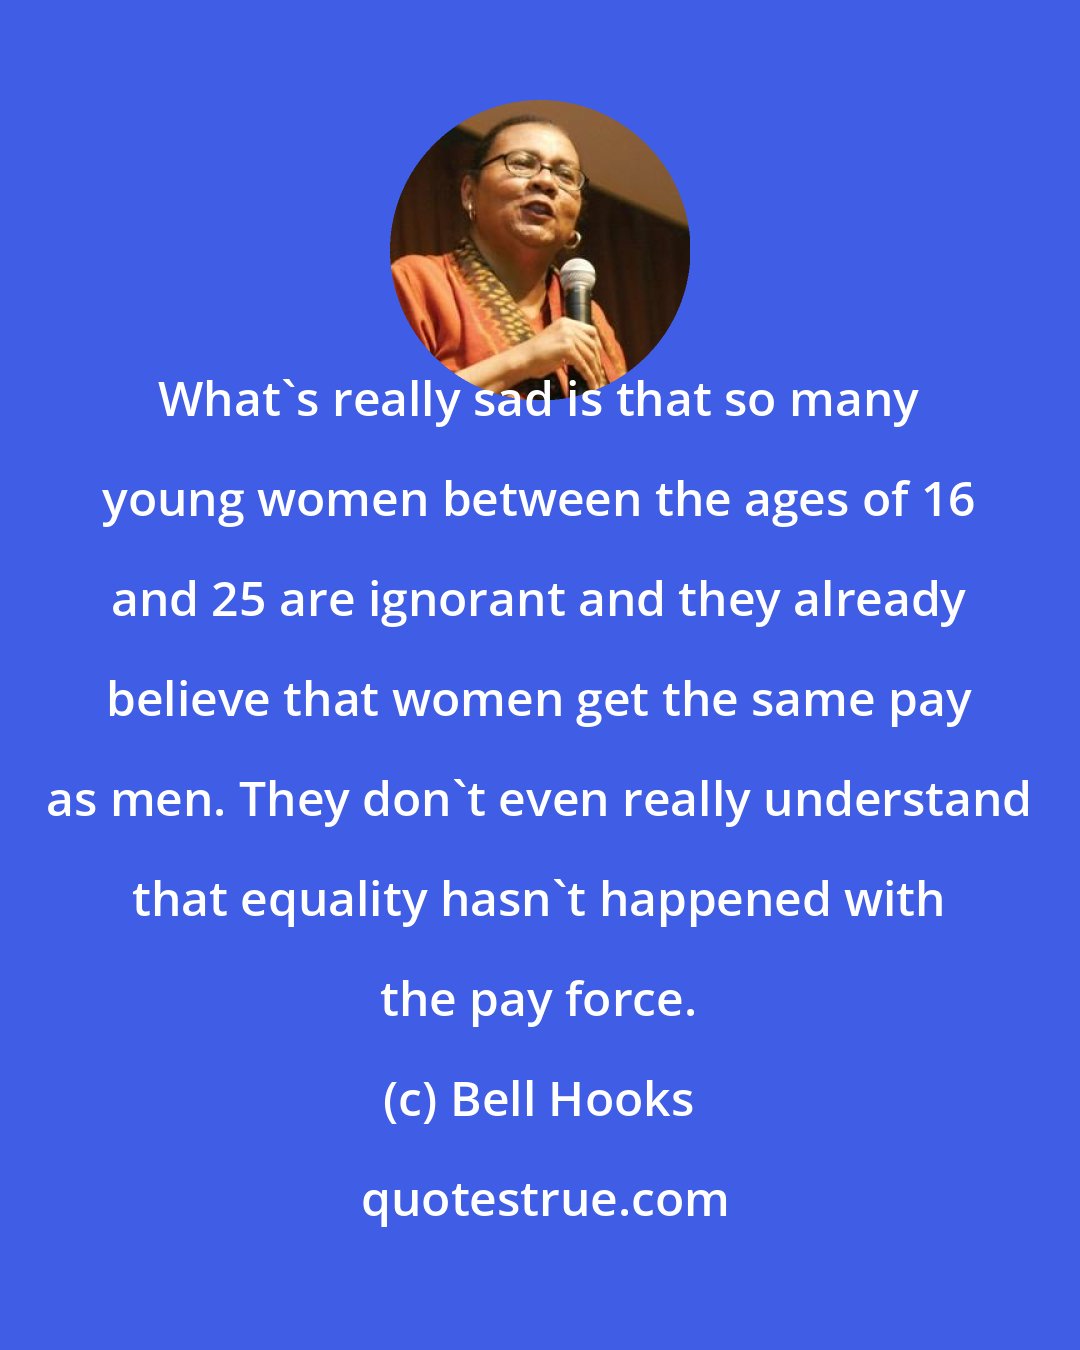 Bell Hooks: What's really sad is that so many young women between the ages of 16 and 25 are ignorant and they already believe that women get the same pay as men. They don't even really understand that equality hasn't happened with the pay force.